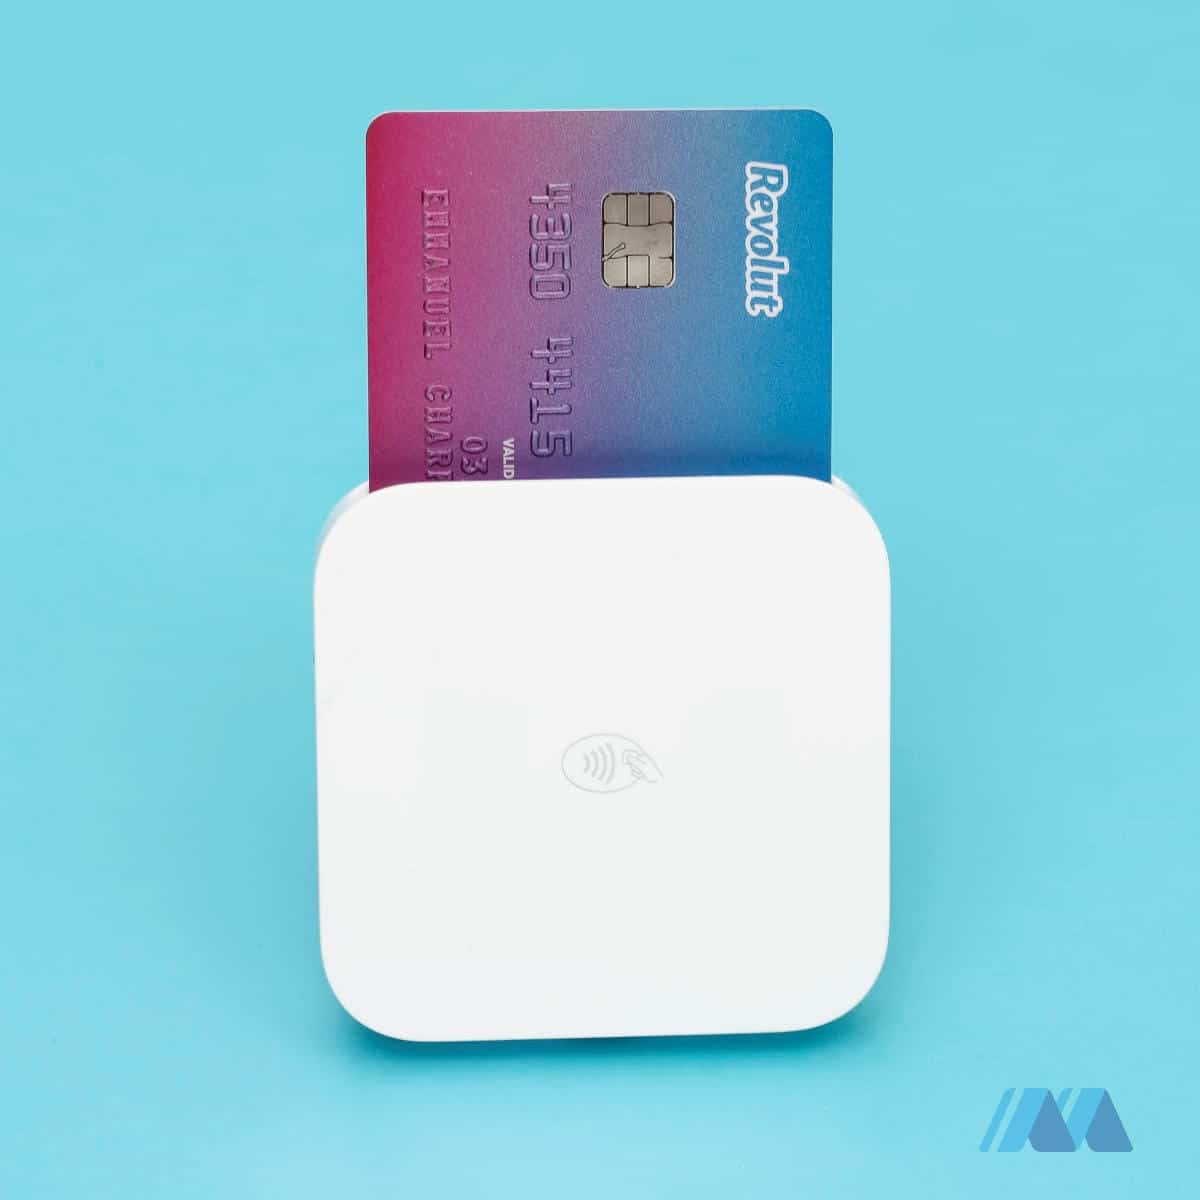 Square Reader with card inserted